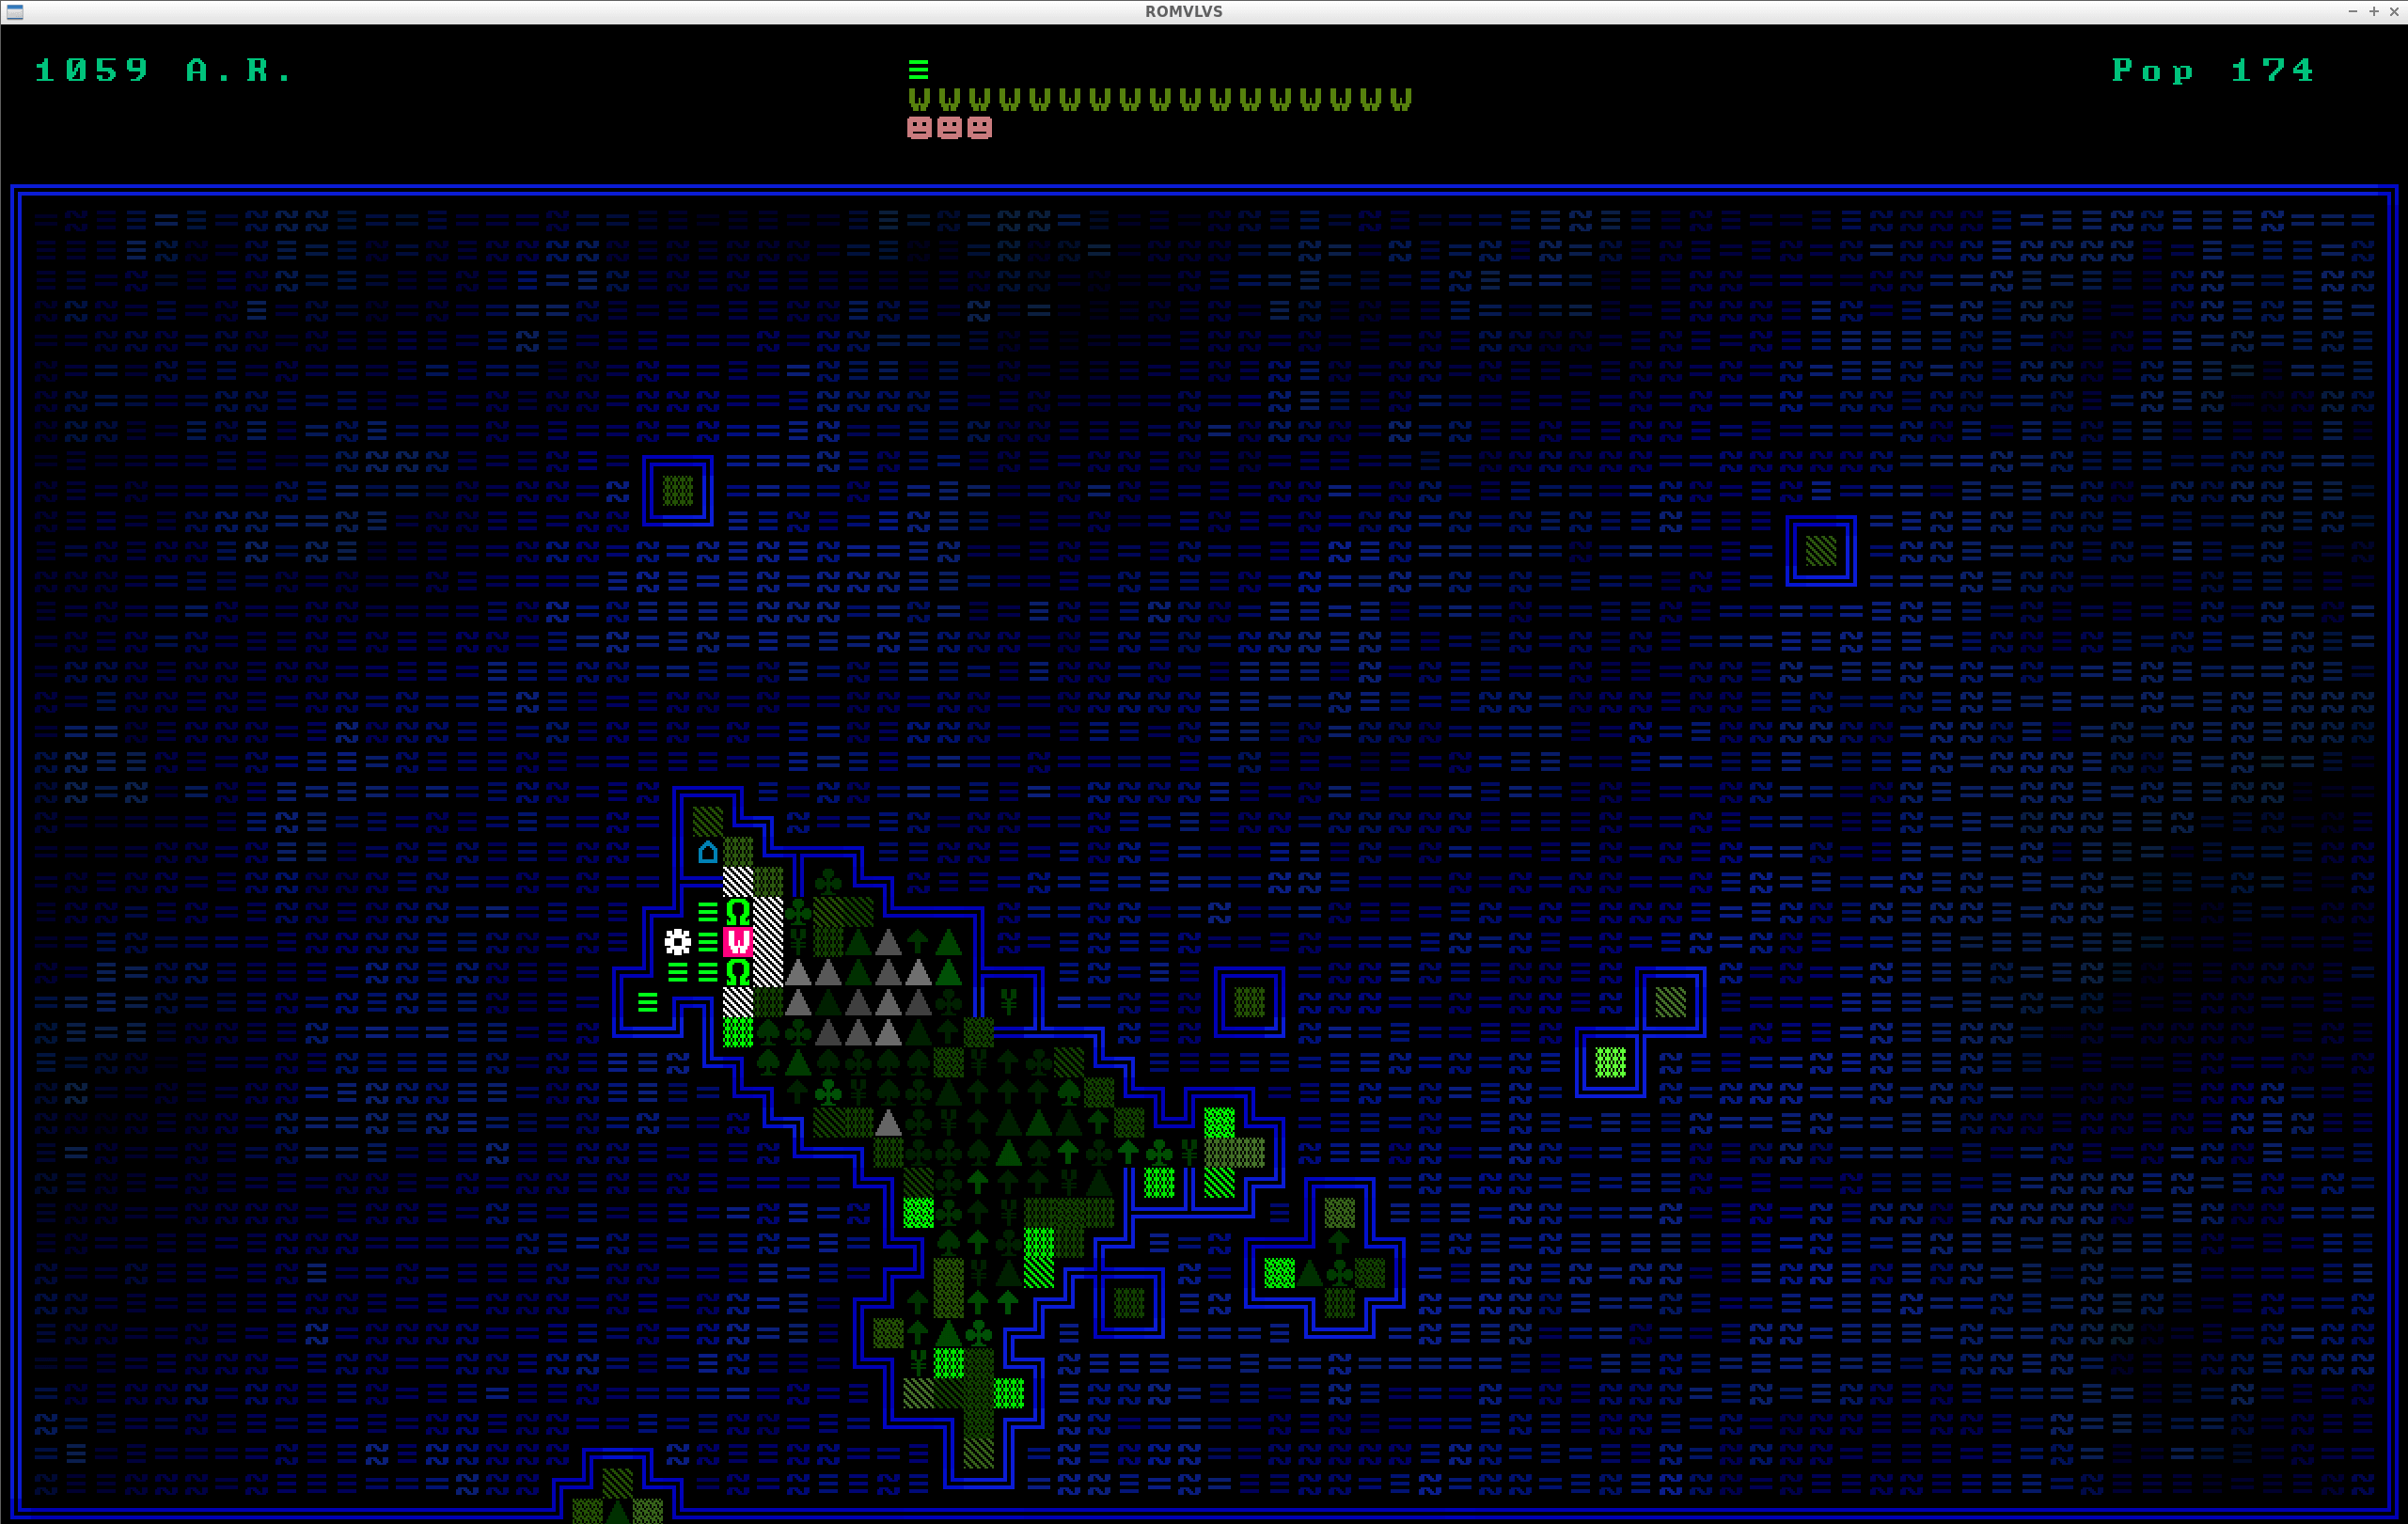 ROMVLVS: Text mode ASCII interface showing a green island in a sea of blue.